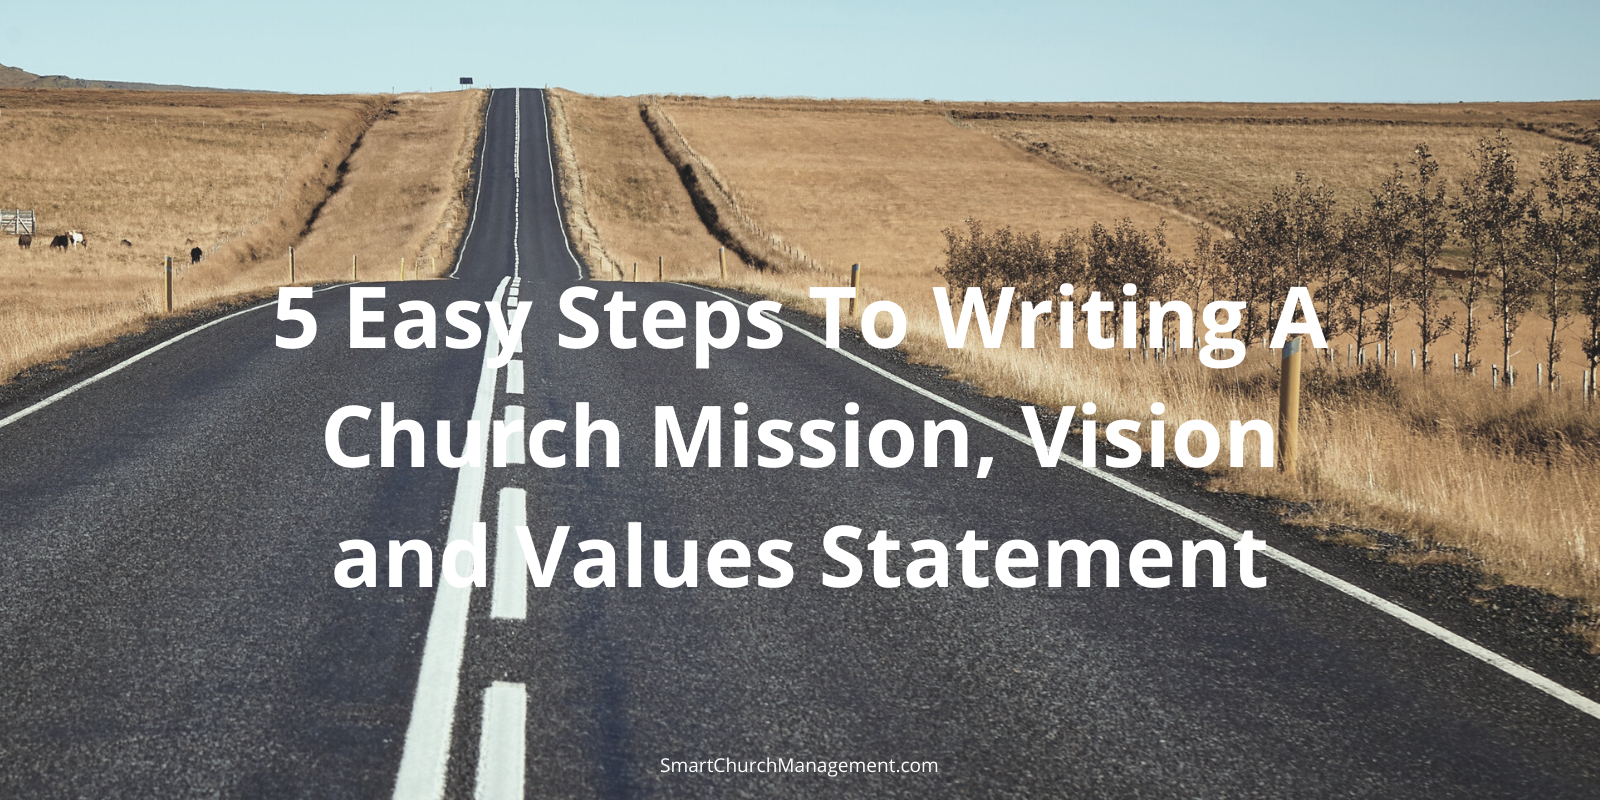 17 Easy Steps To Writing A Church Mission, Vision and Values